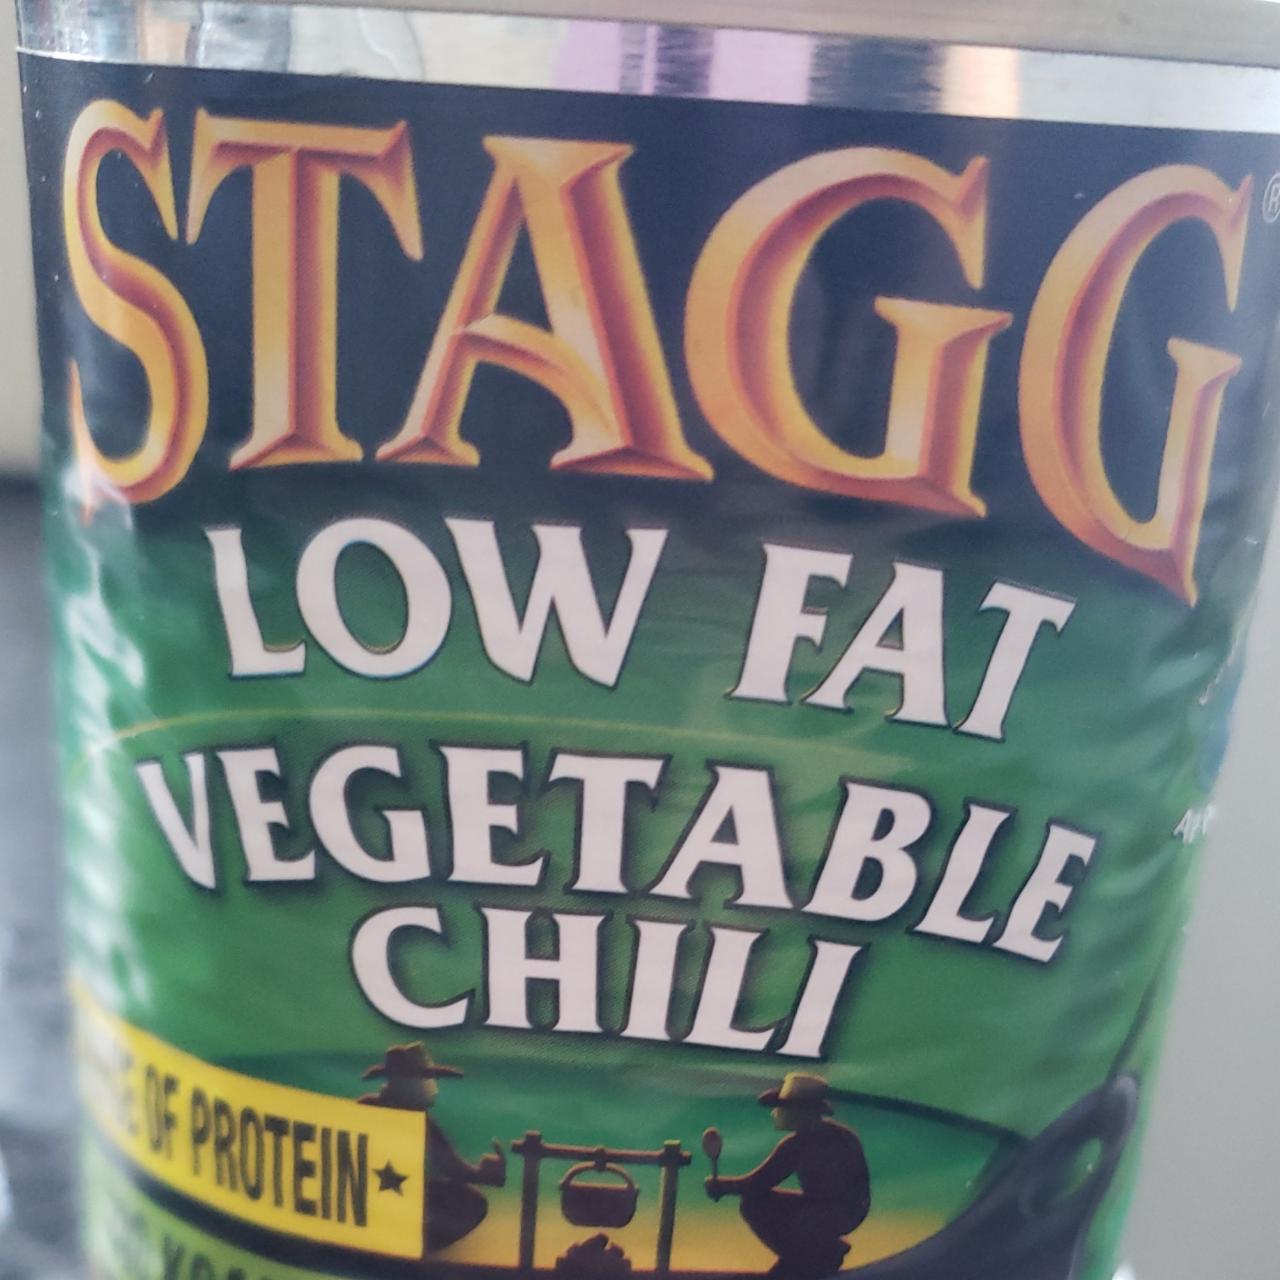 Fotografie - Low Fat vegetable chili Stagg